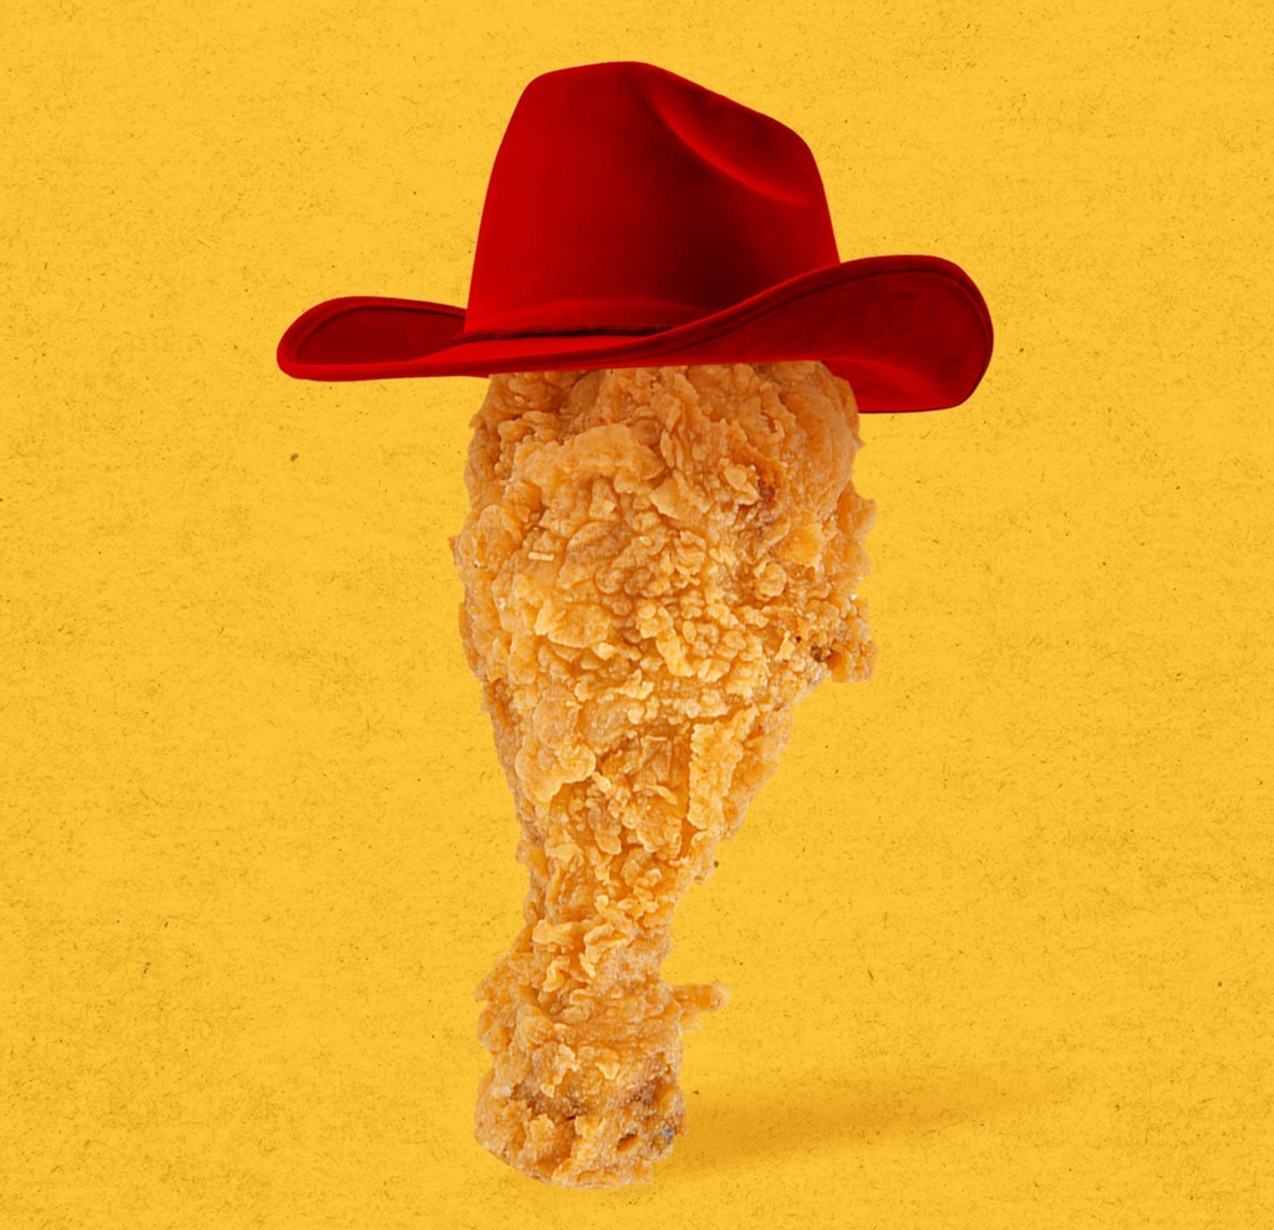 Texas Pete® offers the ideal flavor to complement fried chicken.